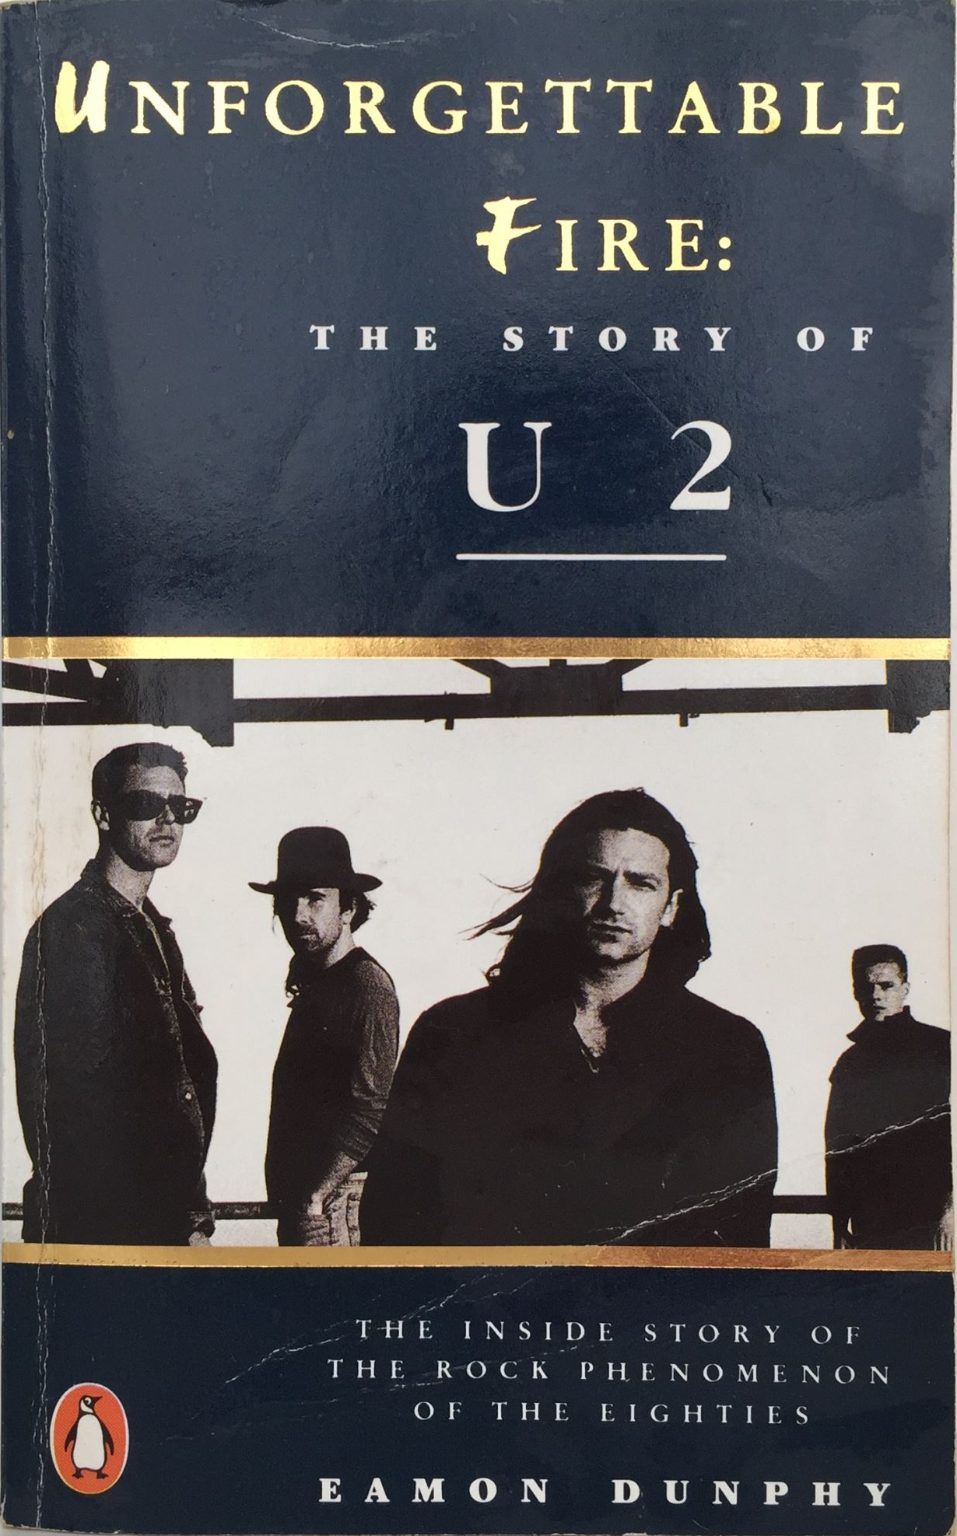 UNFORGETTABLE FIRE: The Story Of U2